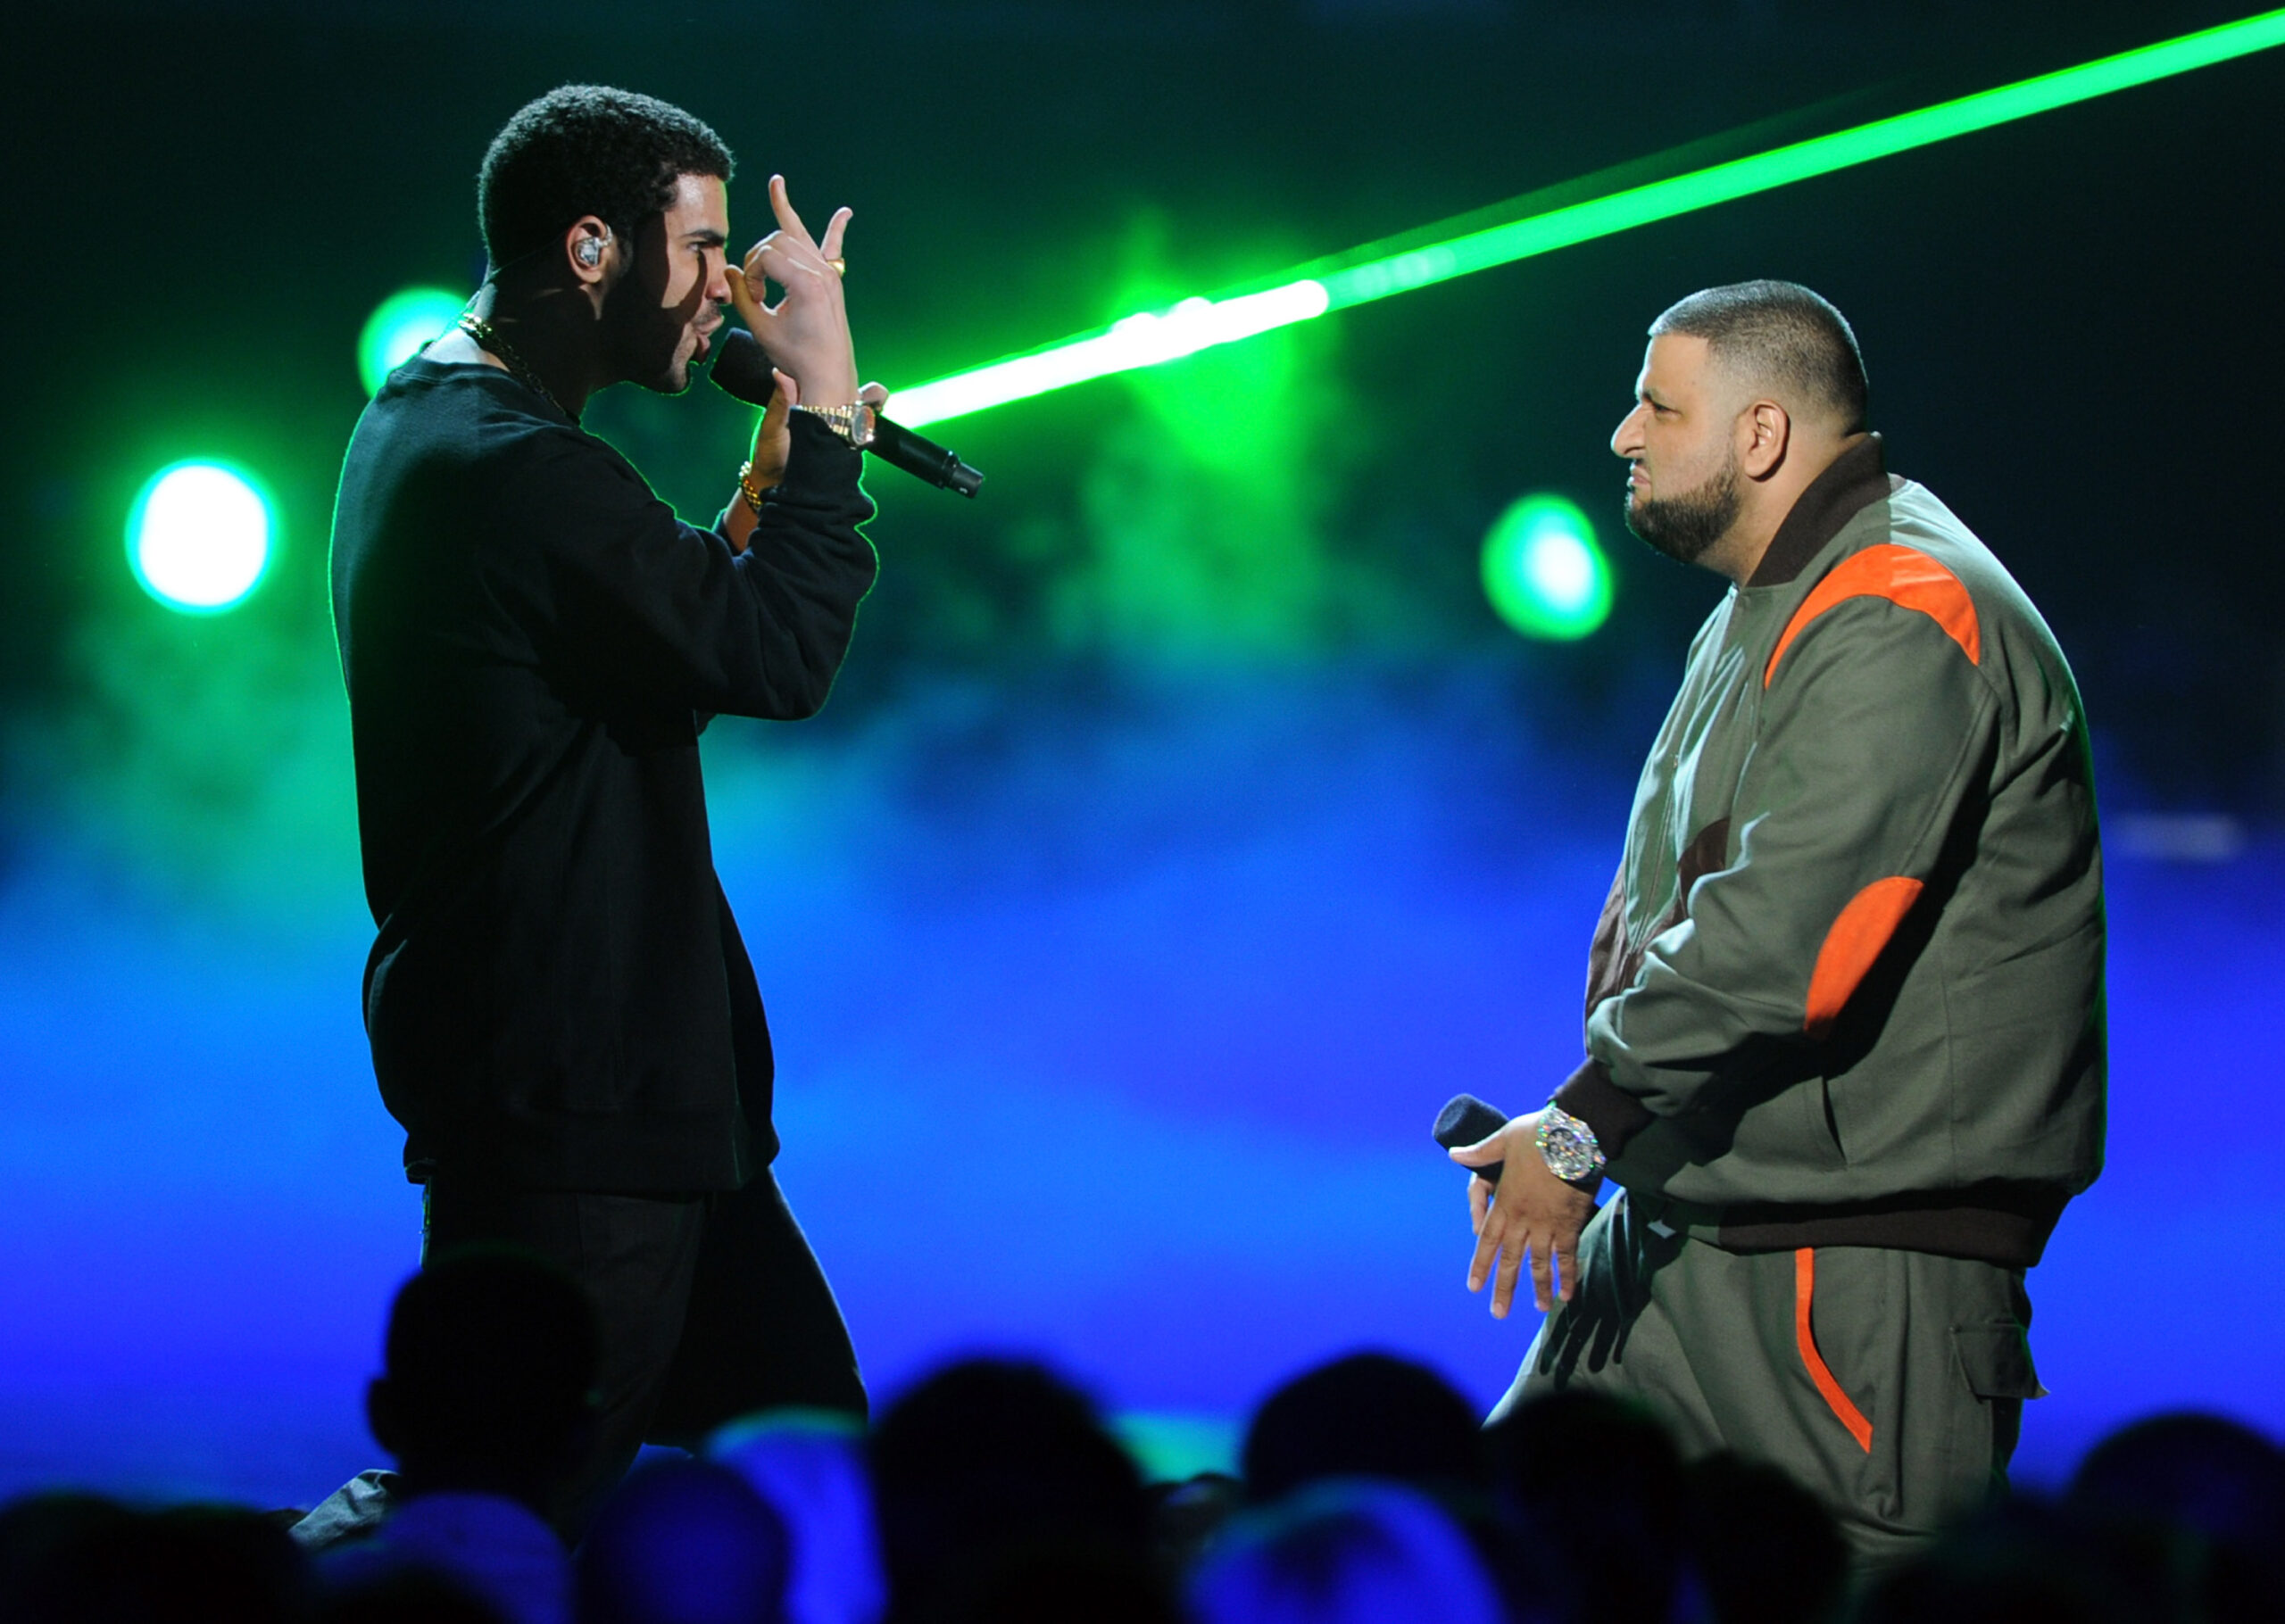 DJ Khaled Confirms Drake Will Make 2 Appearances On His Upcoming Album